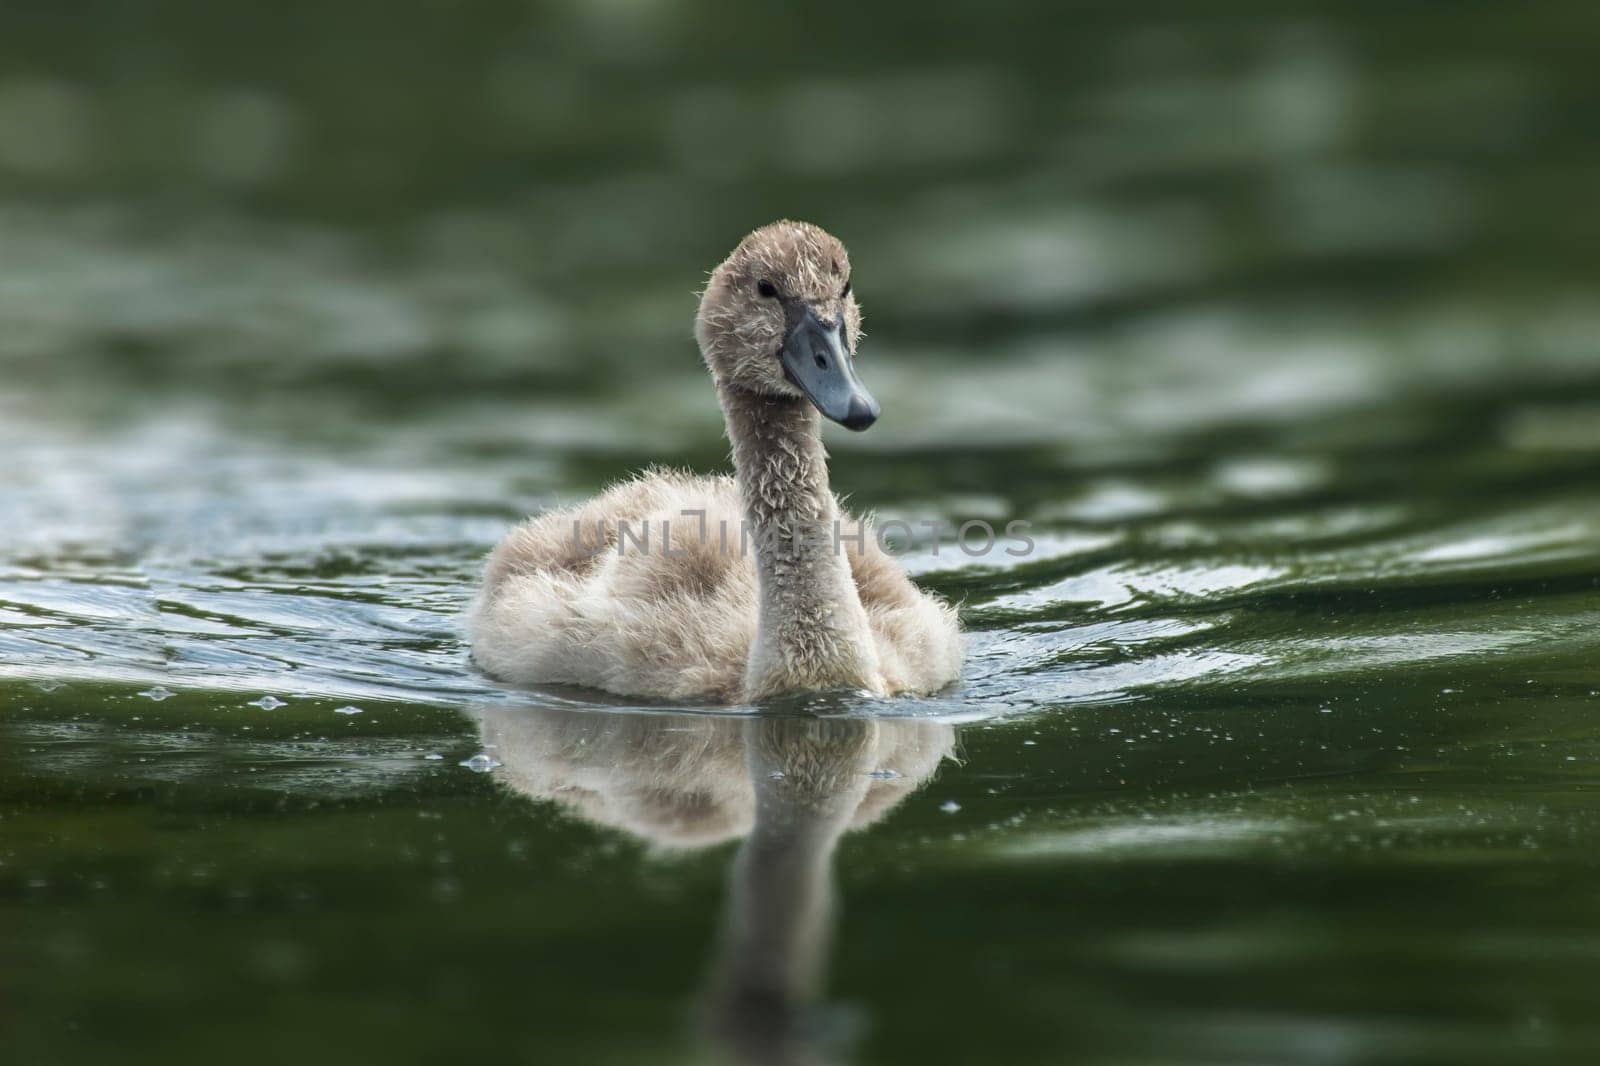 a young mute swan (Cygnus olor) chick swims on a reflecting lake